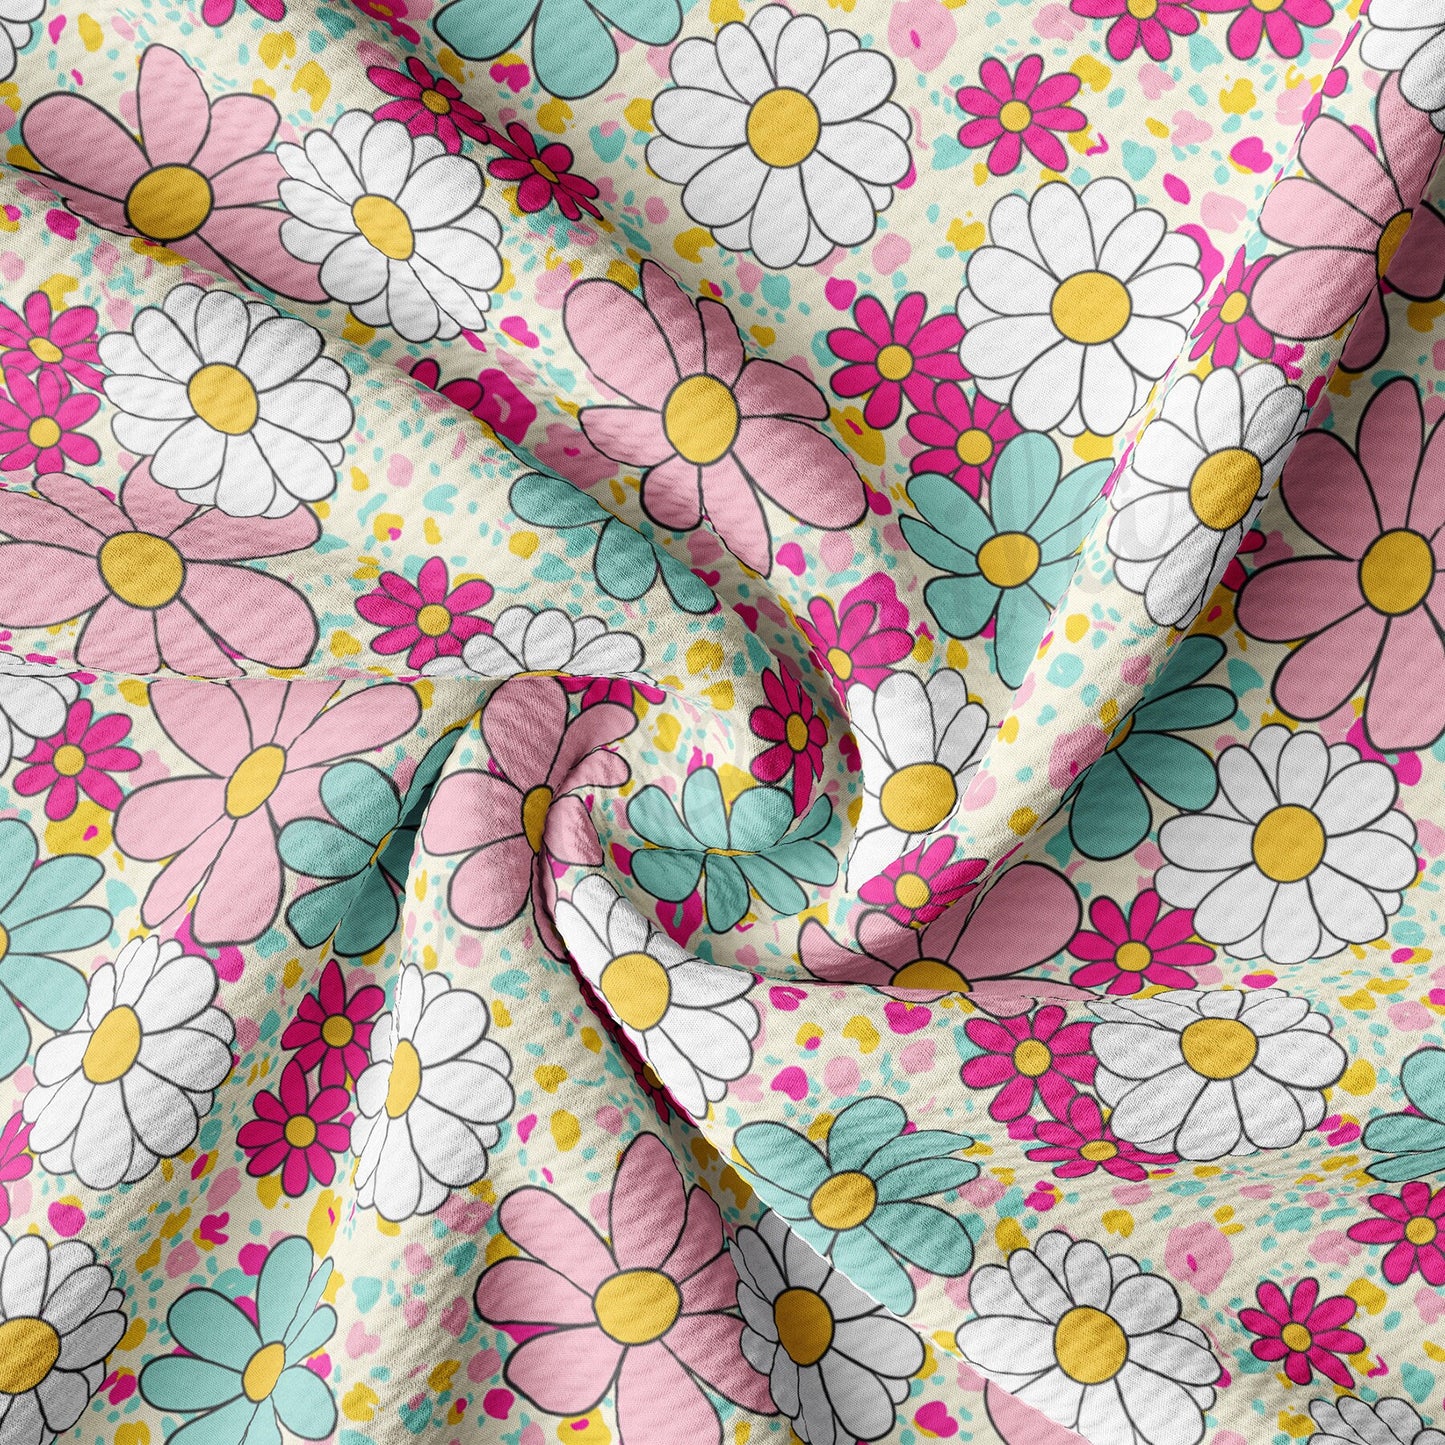 Floral  Bullet Textured Fabric by the yard AA1569